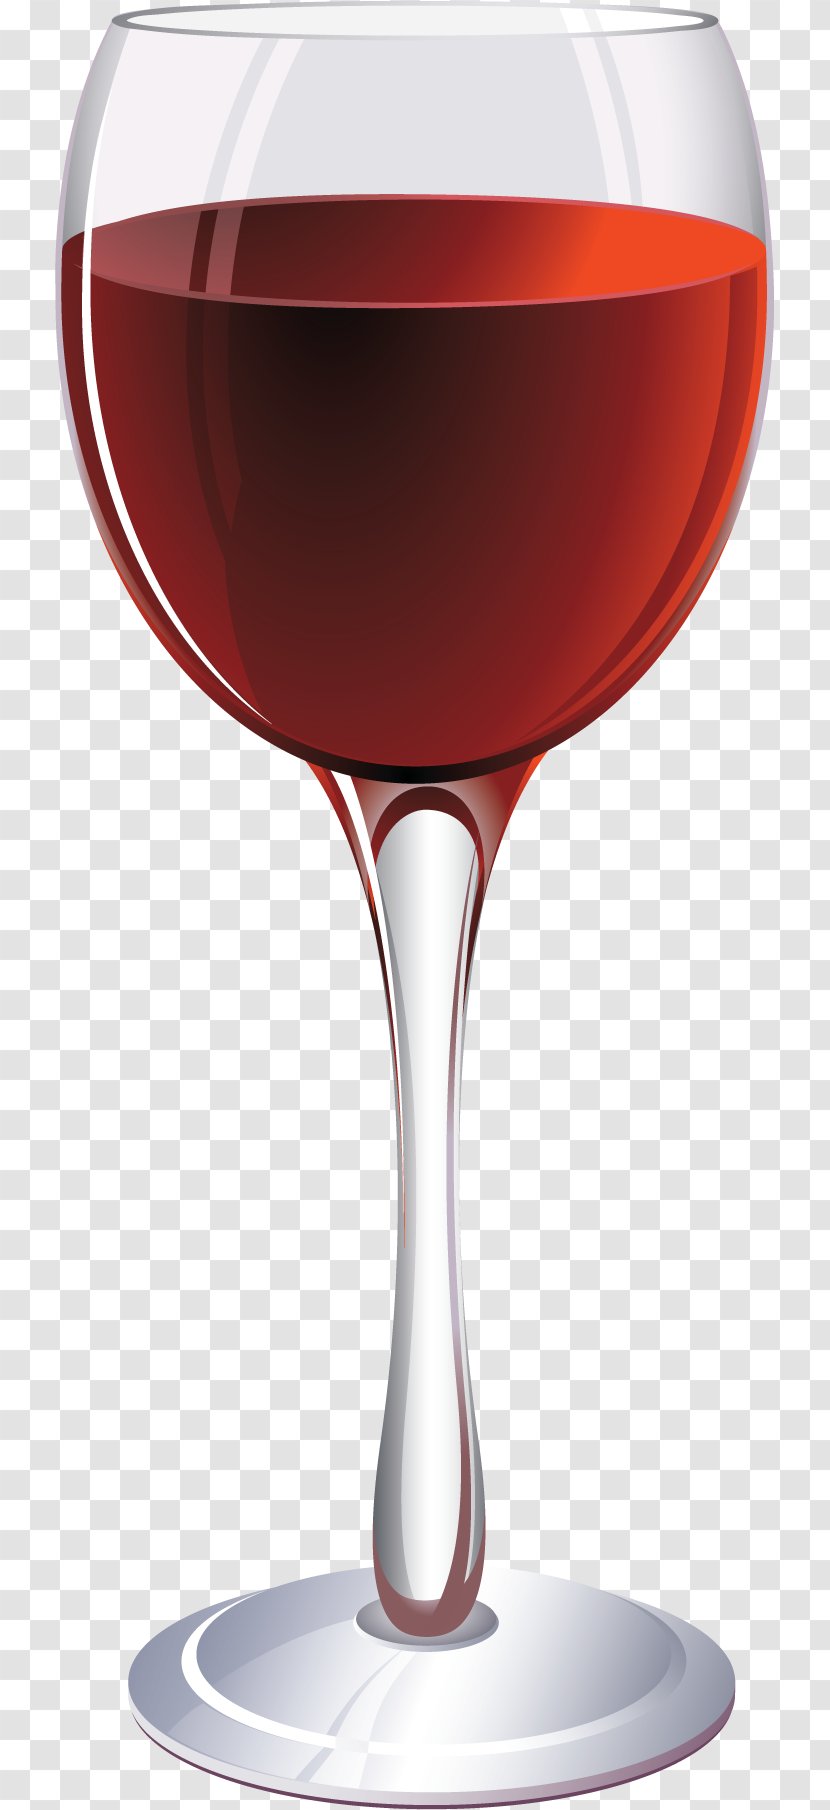 Red Wine Champagne Glass Clip Art - Tableware - Image Transparent PNG